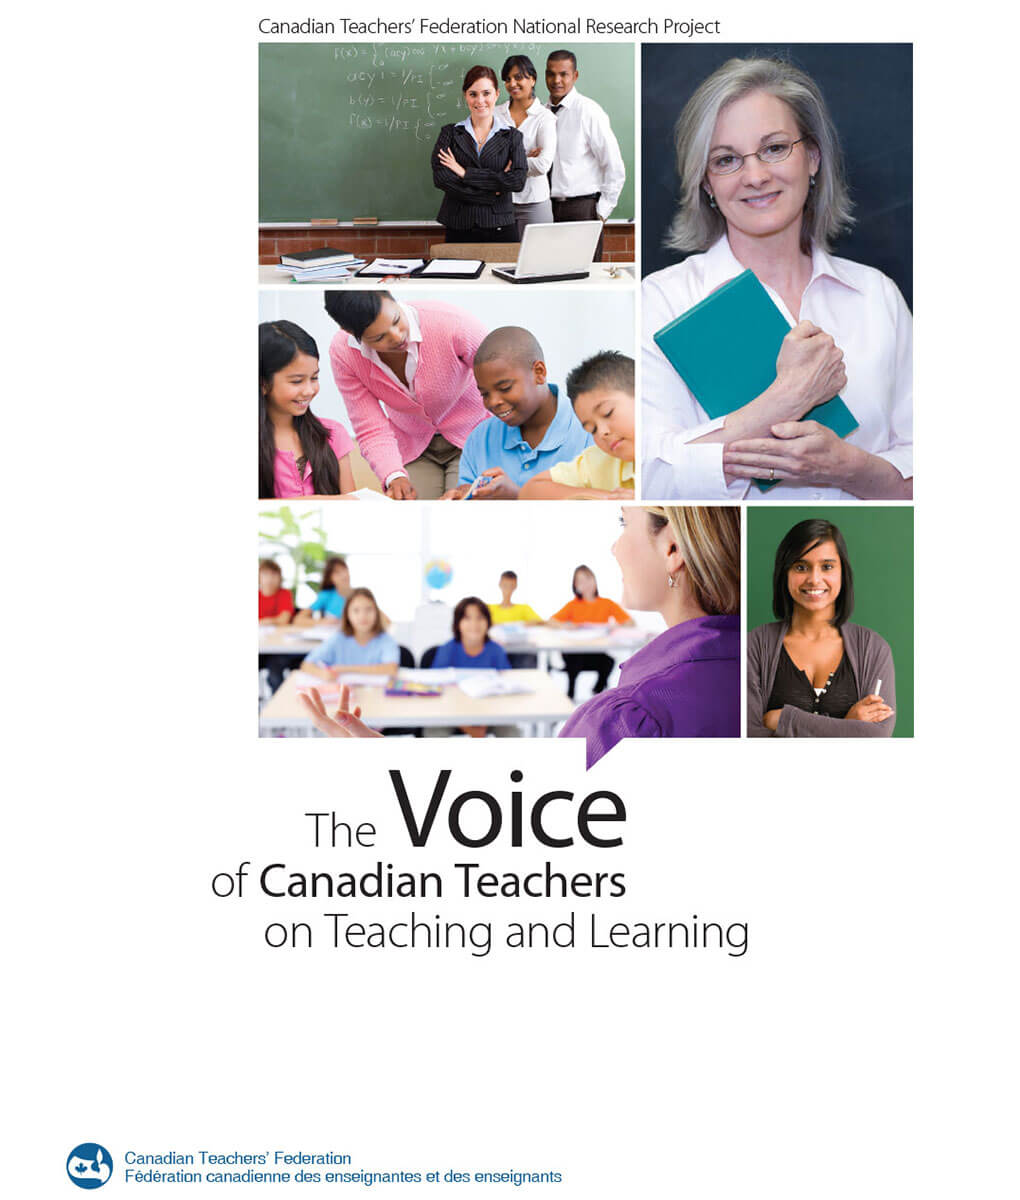 The Voice of Canadian Teachers on Teaching and Learning